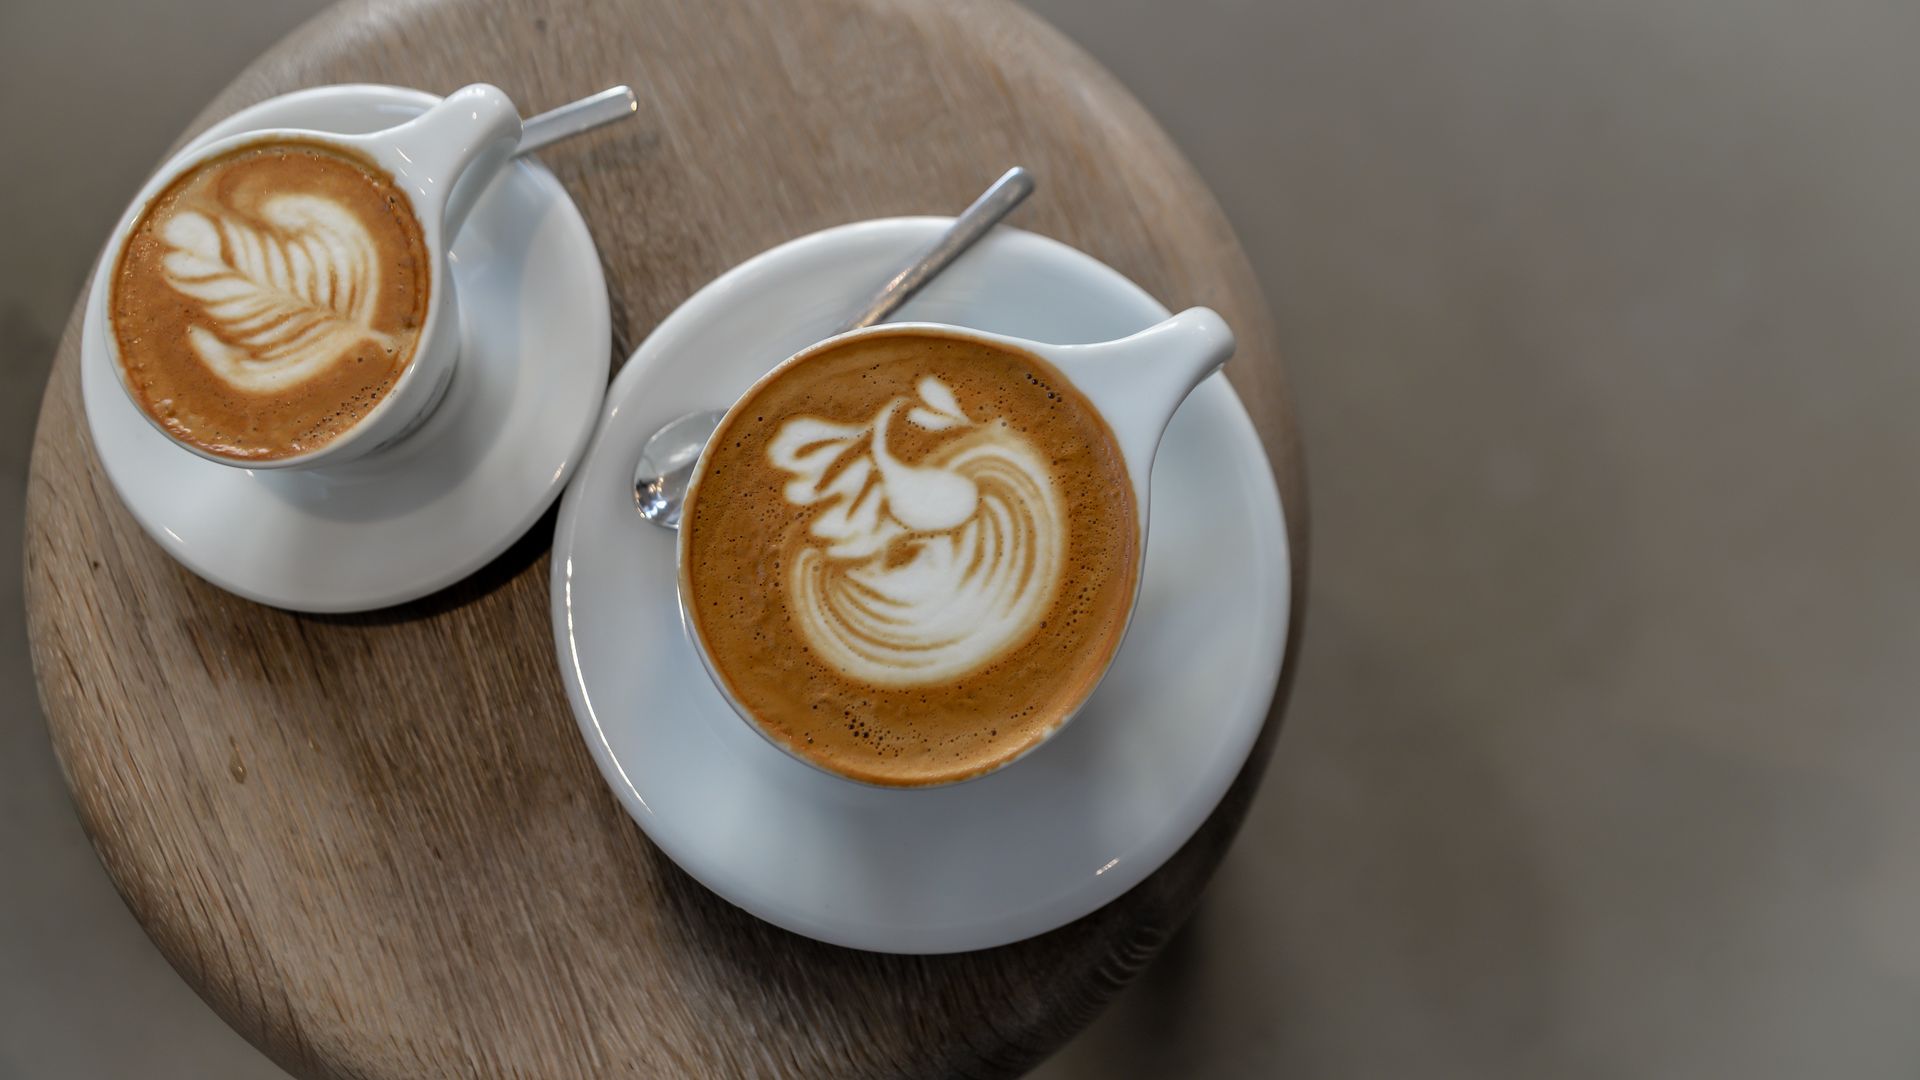 Coffee Cups With Latte Art - Coffee Draws - HD Wallpaper 